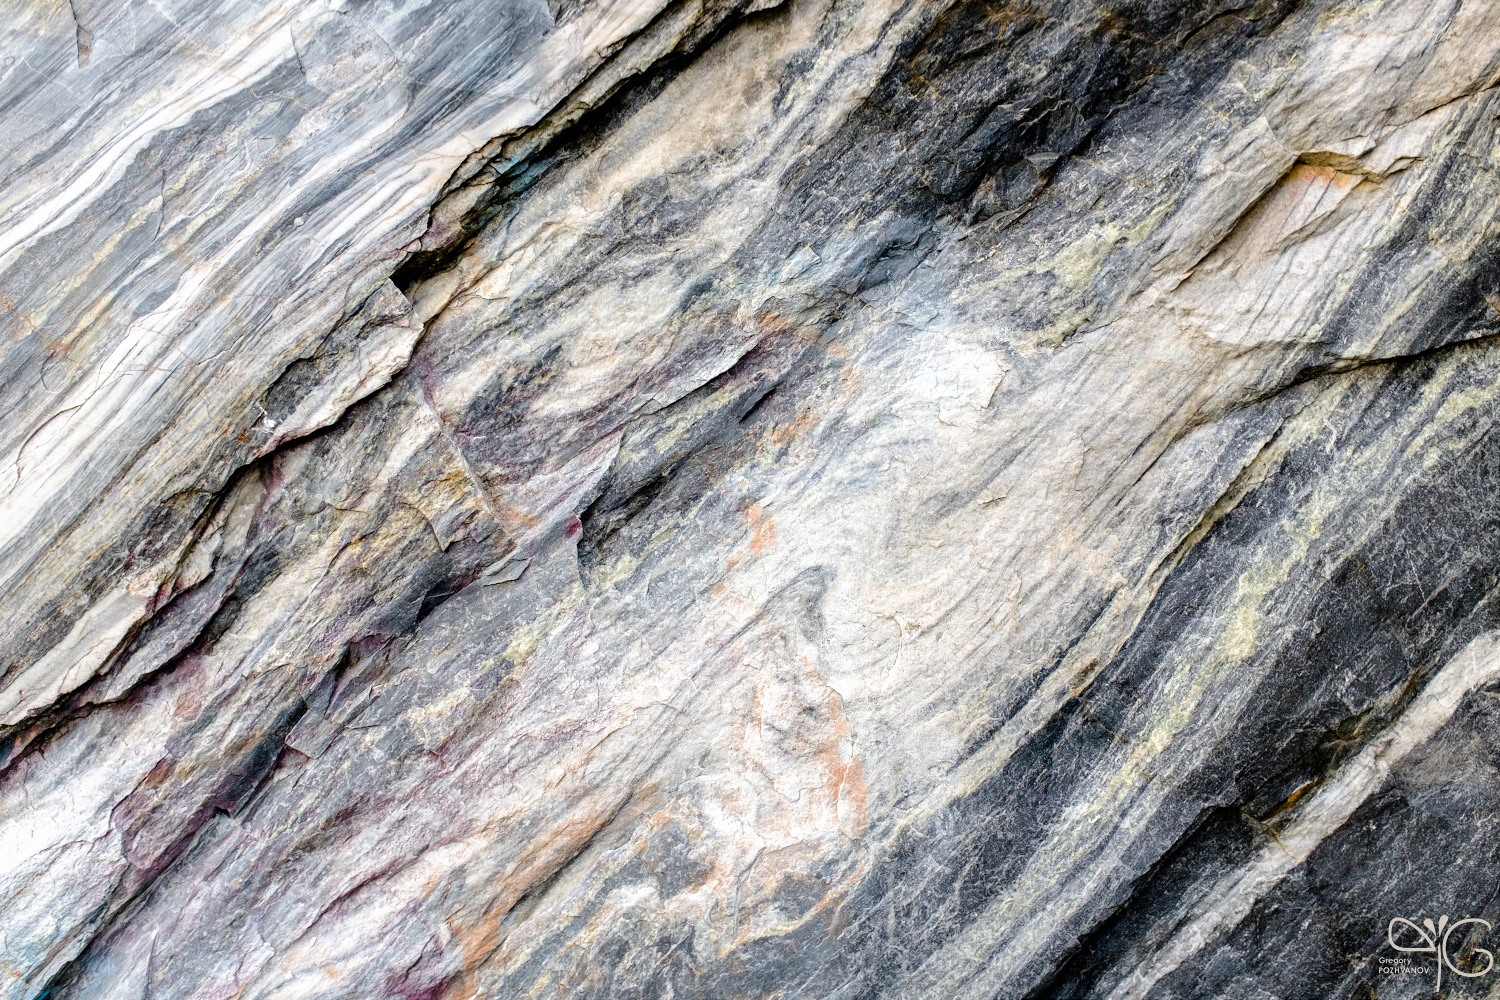 Marble textures in Ruskeala